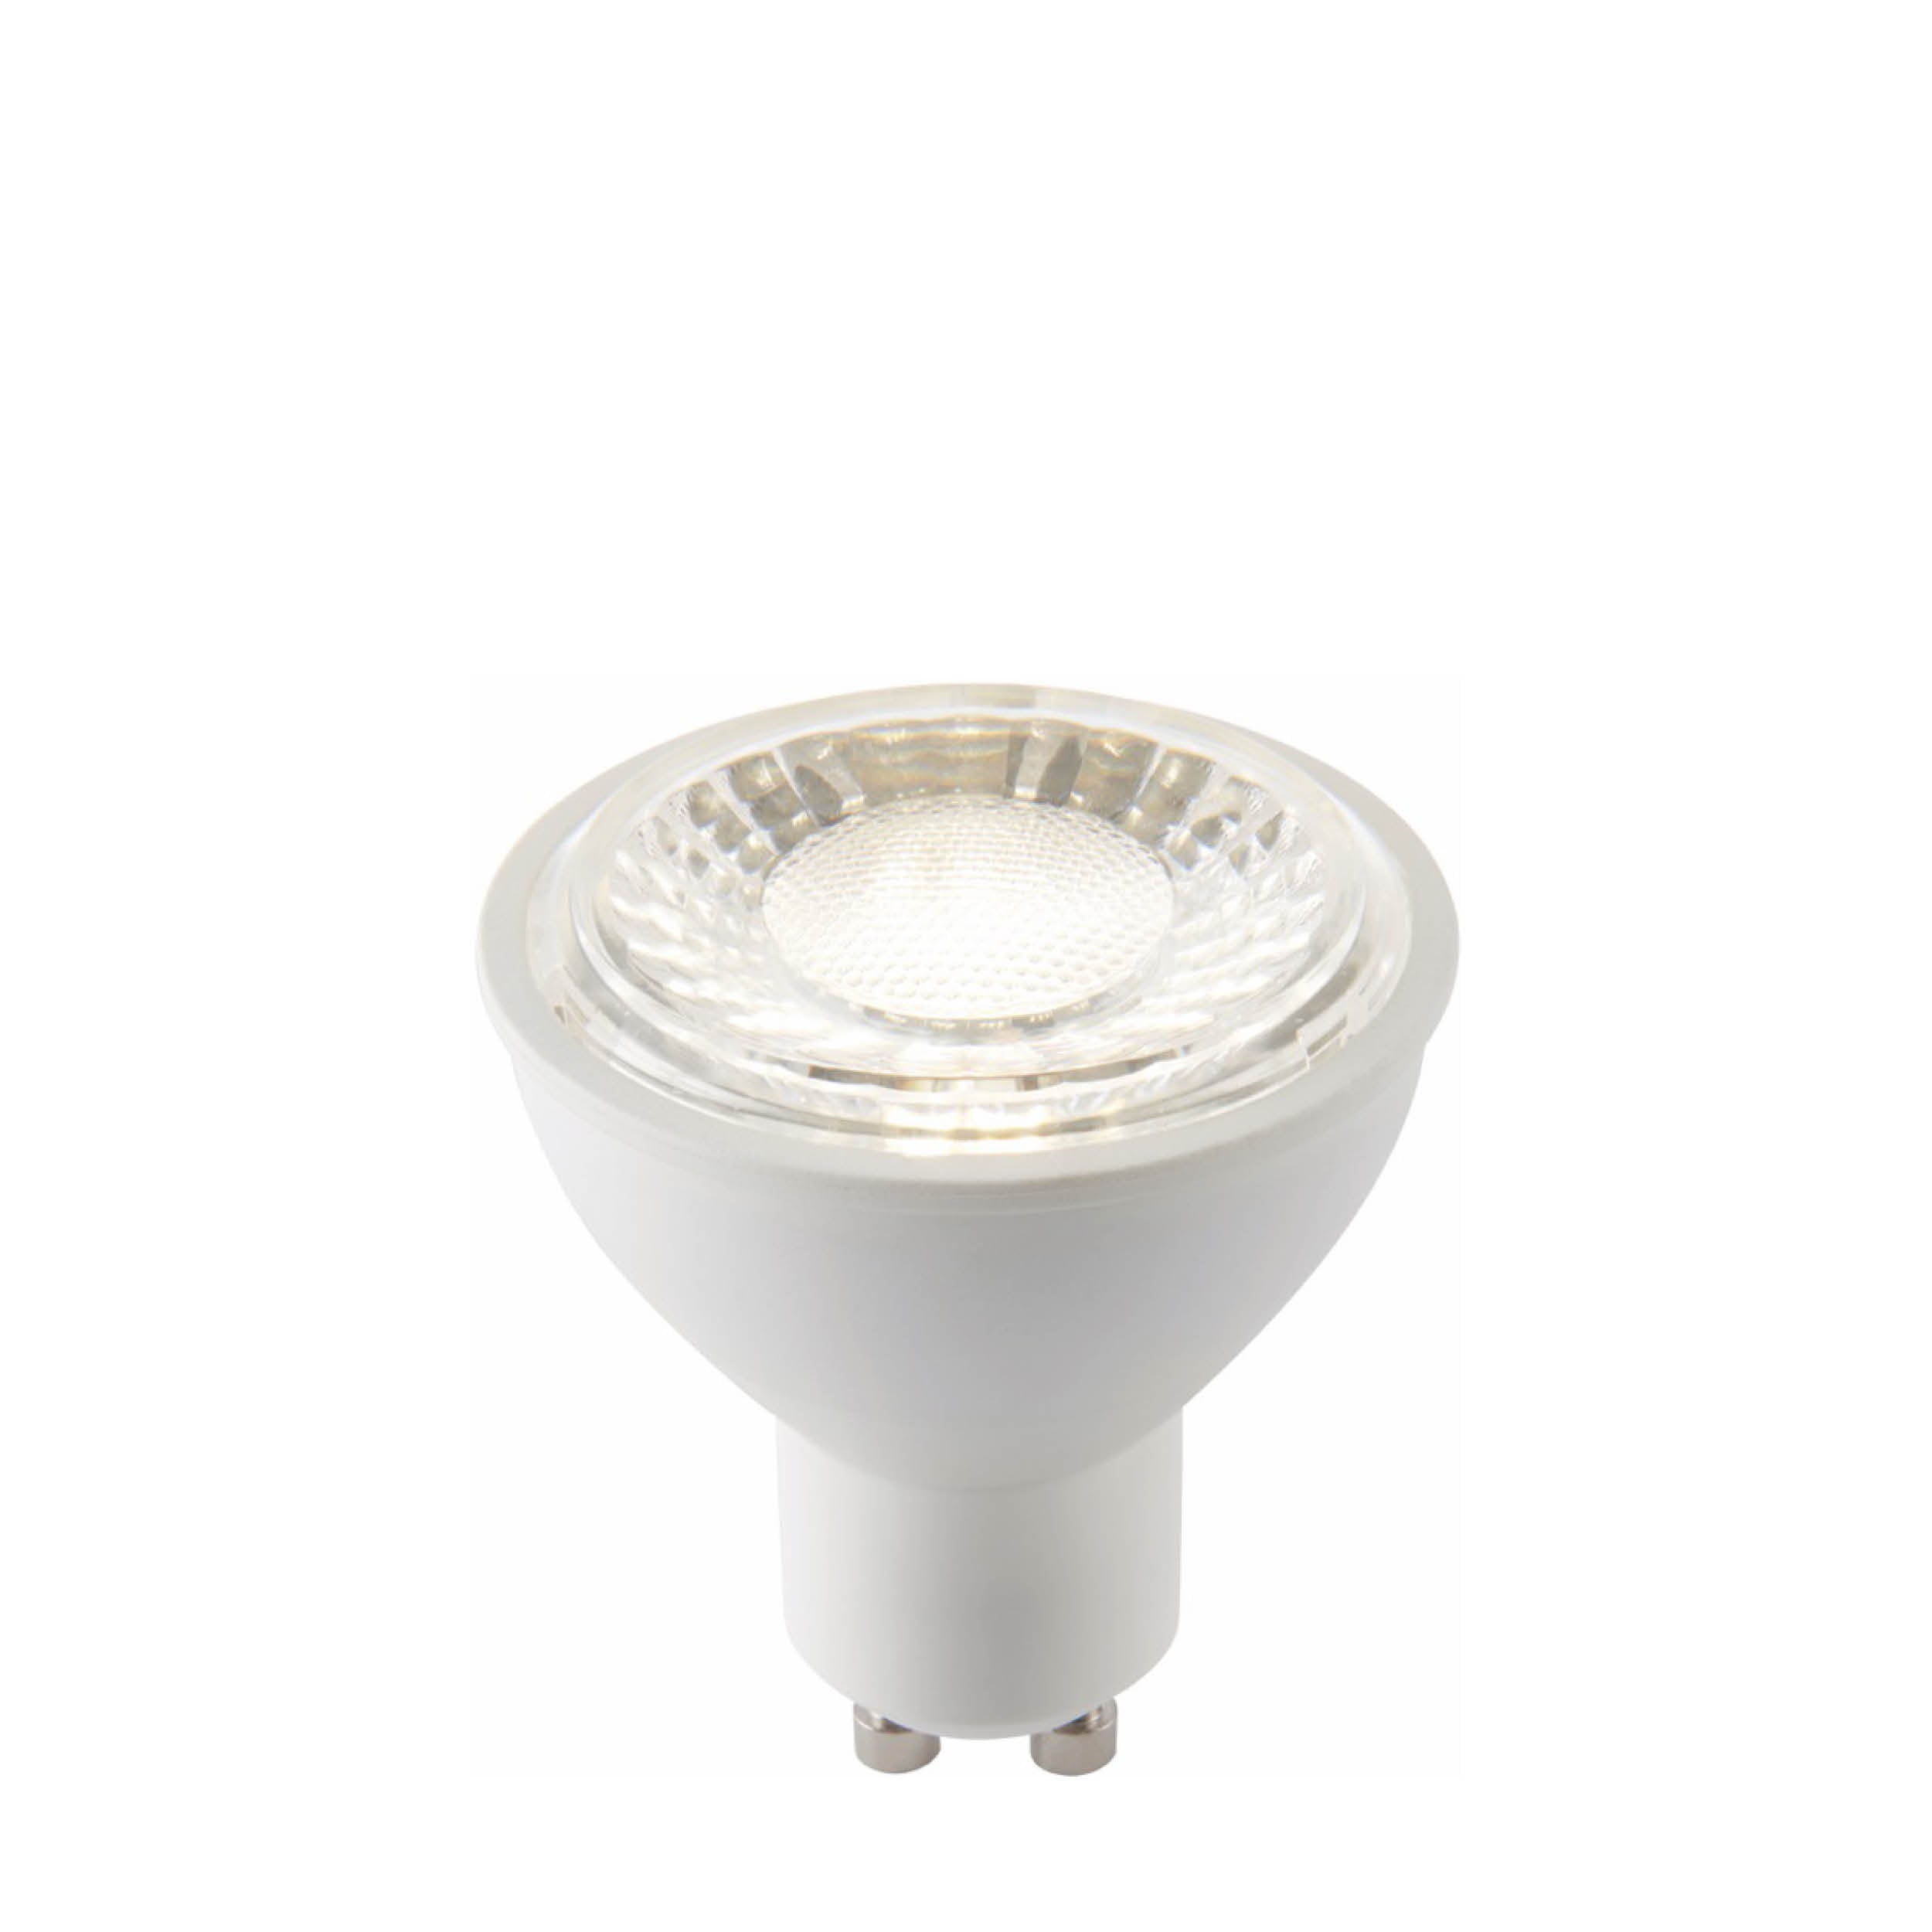 GU10 LED Bulb. Cool White 4000K 7W 680lm. Non-Dimmable